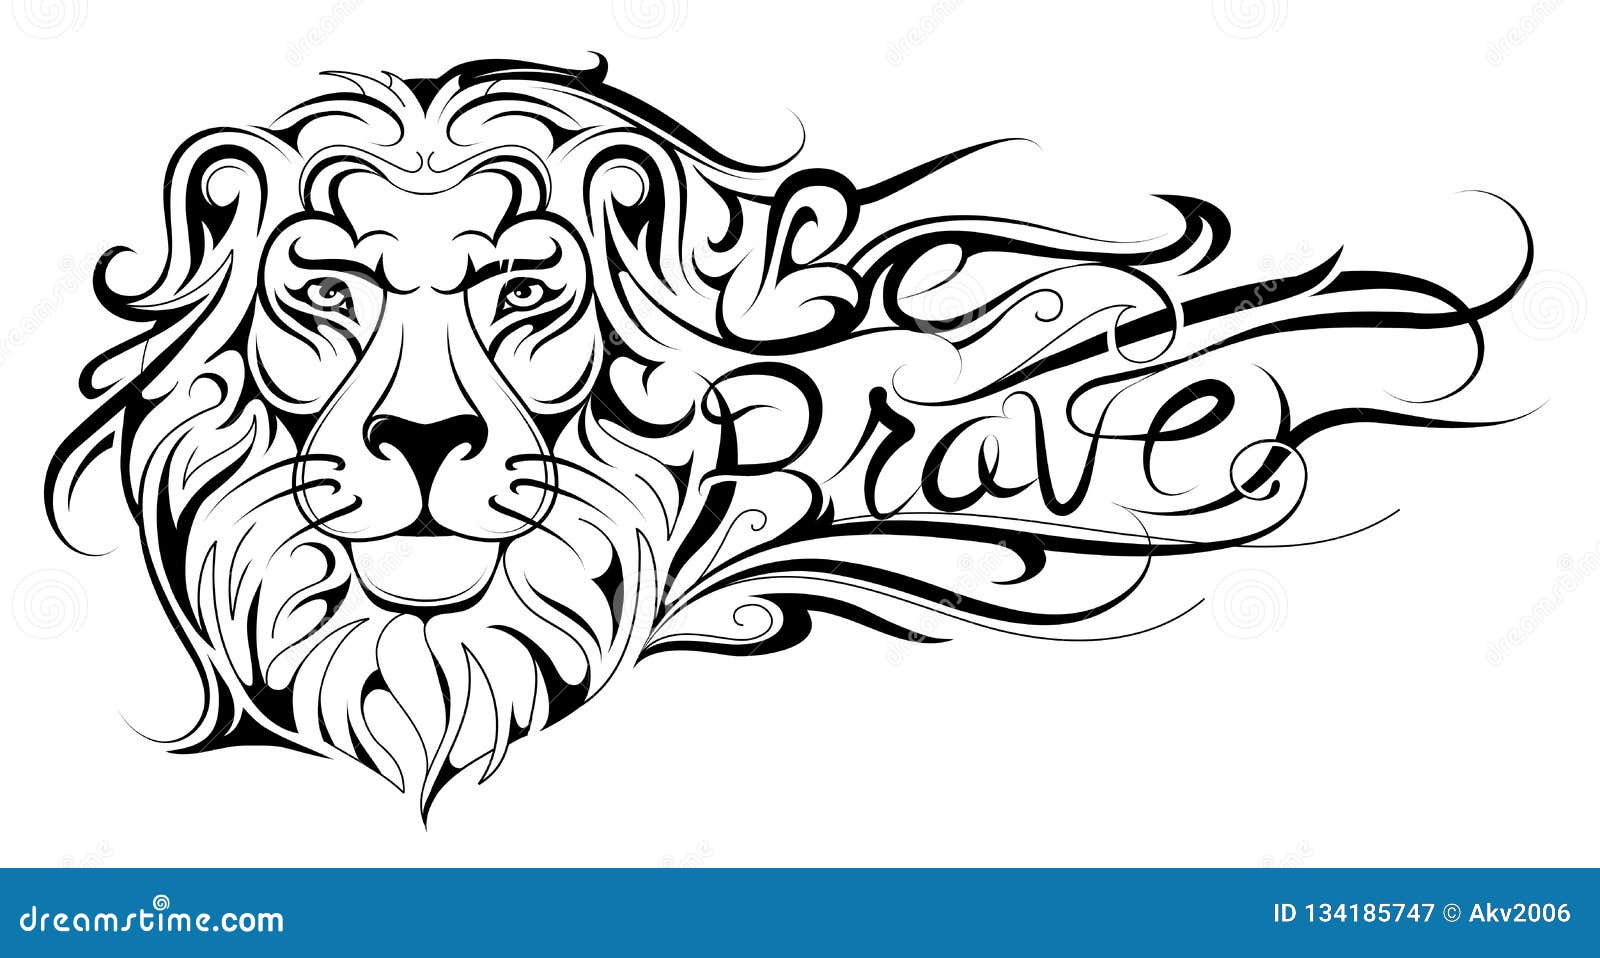 Tattoo design of lion vintage engraving Tattoo design of furious lion  vintage engraved illustration  CanStock